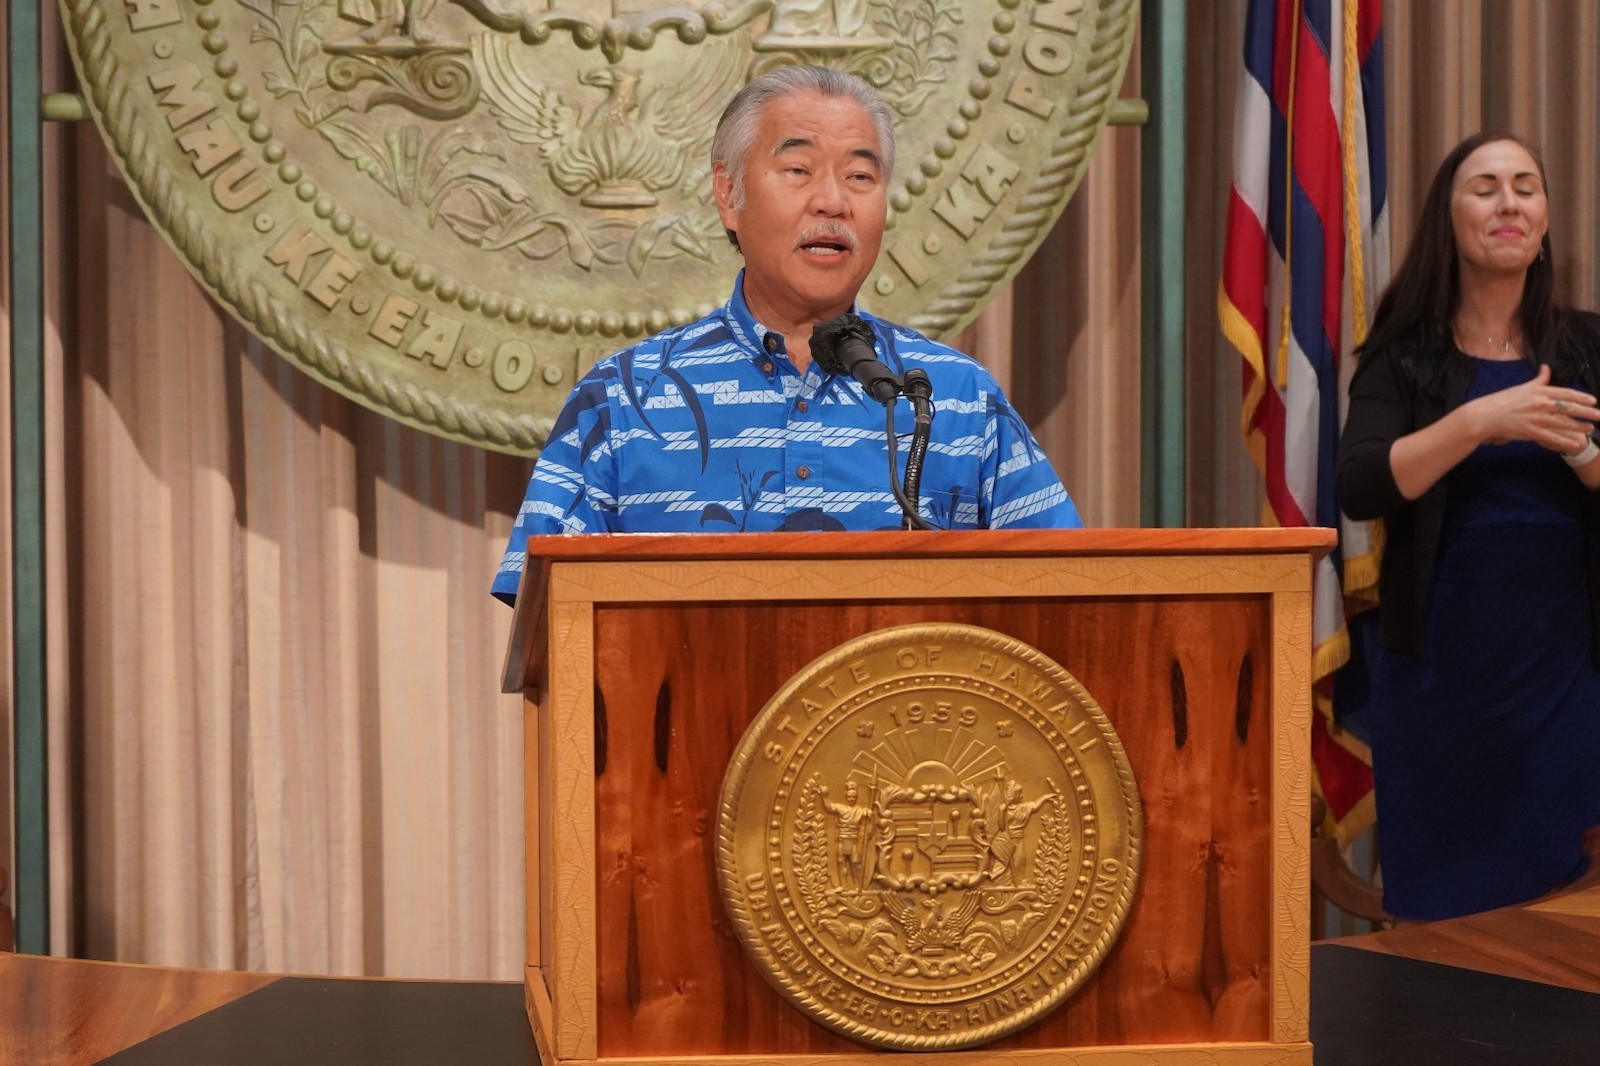 man speaks at podium with Hawaii seal